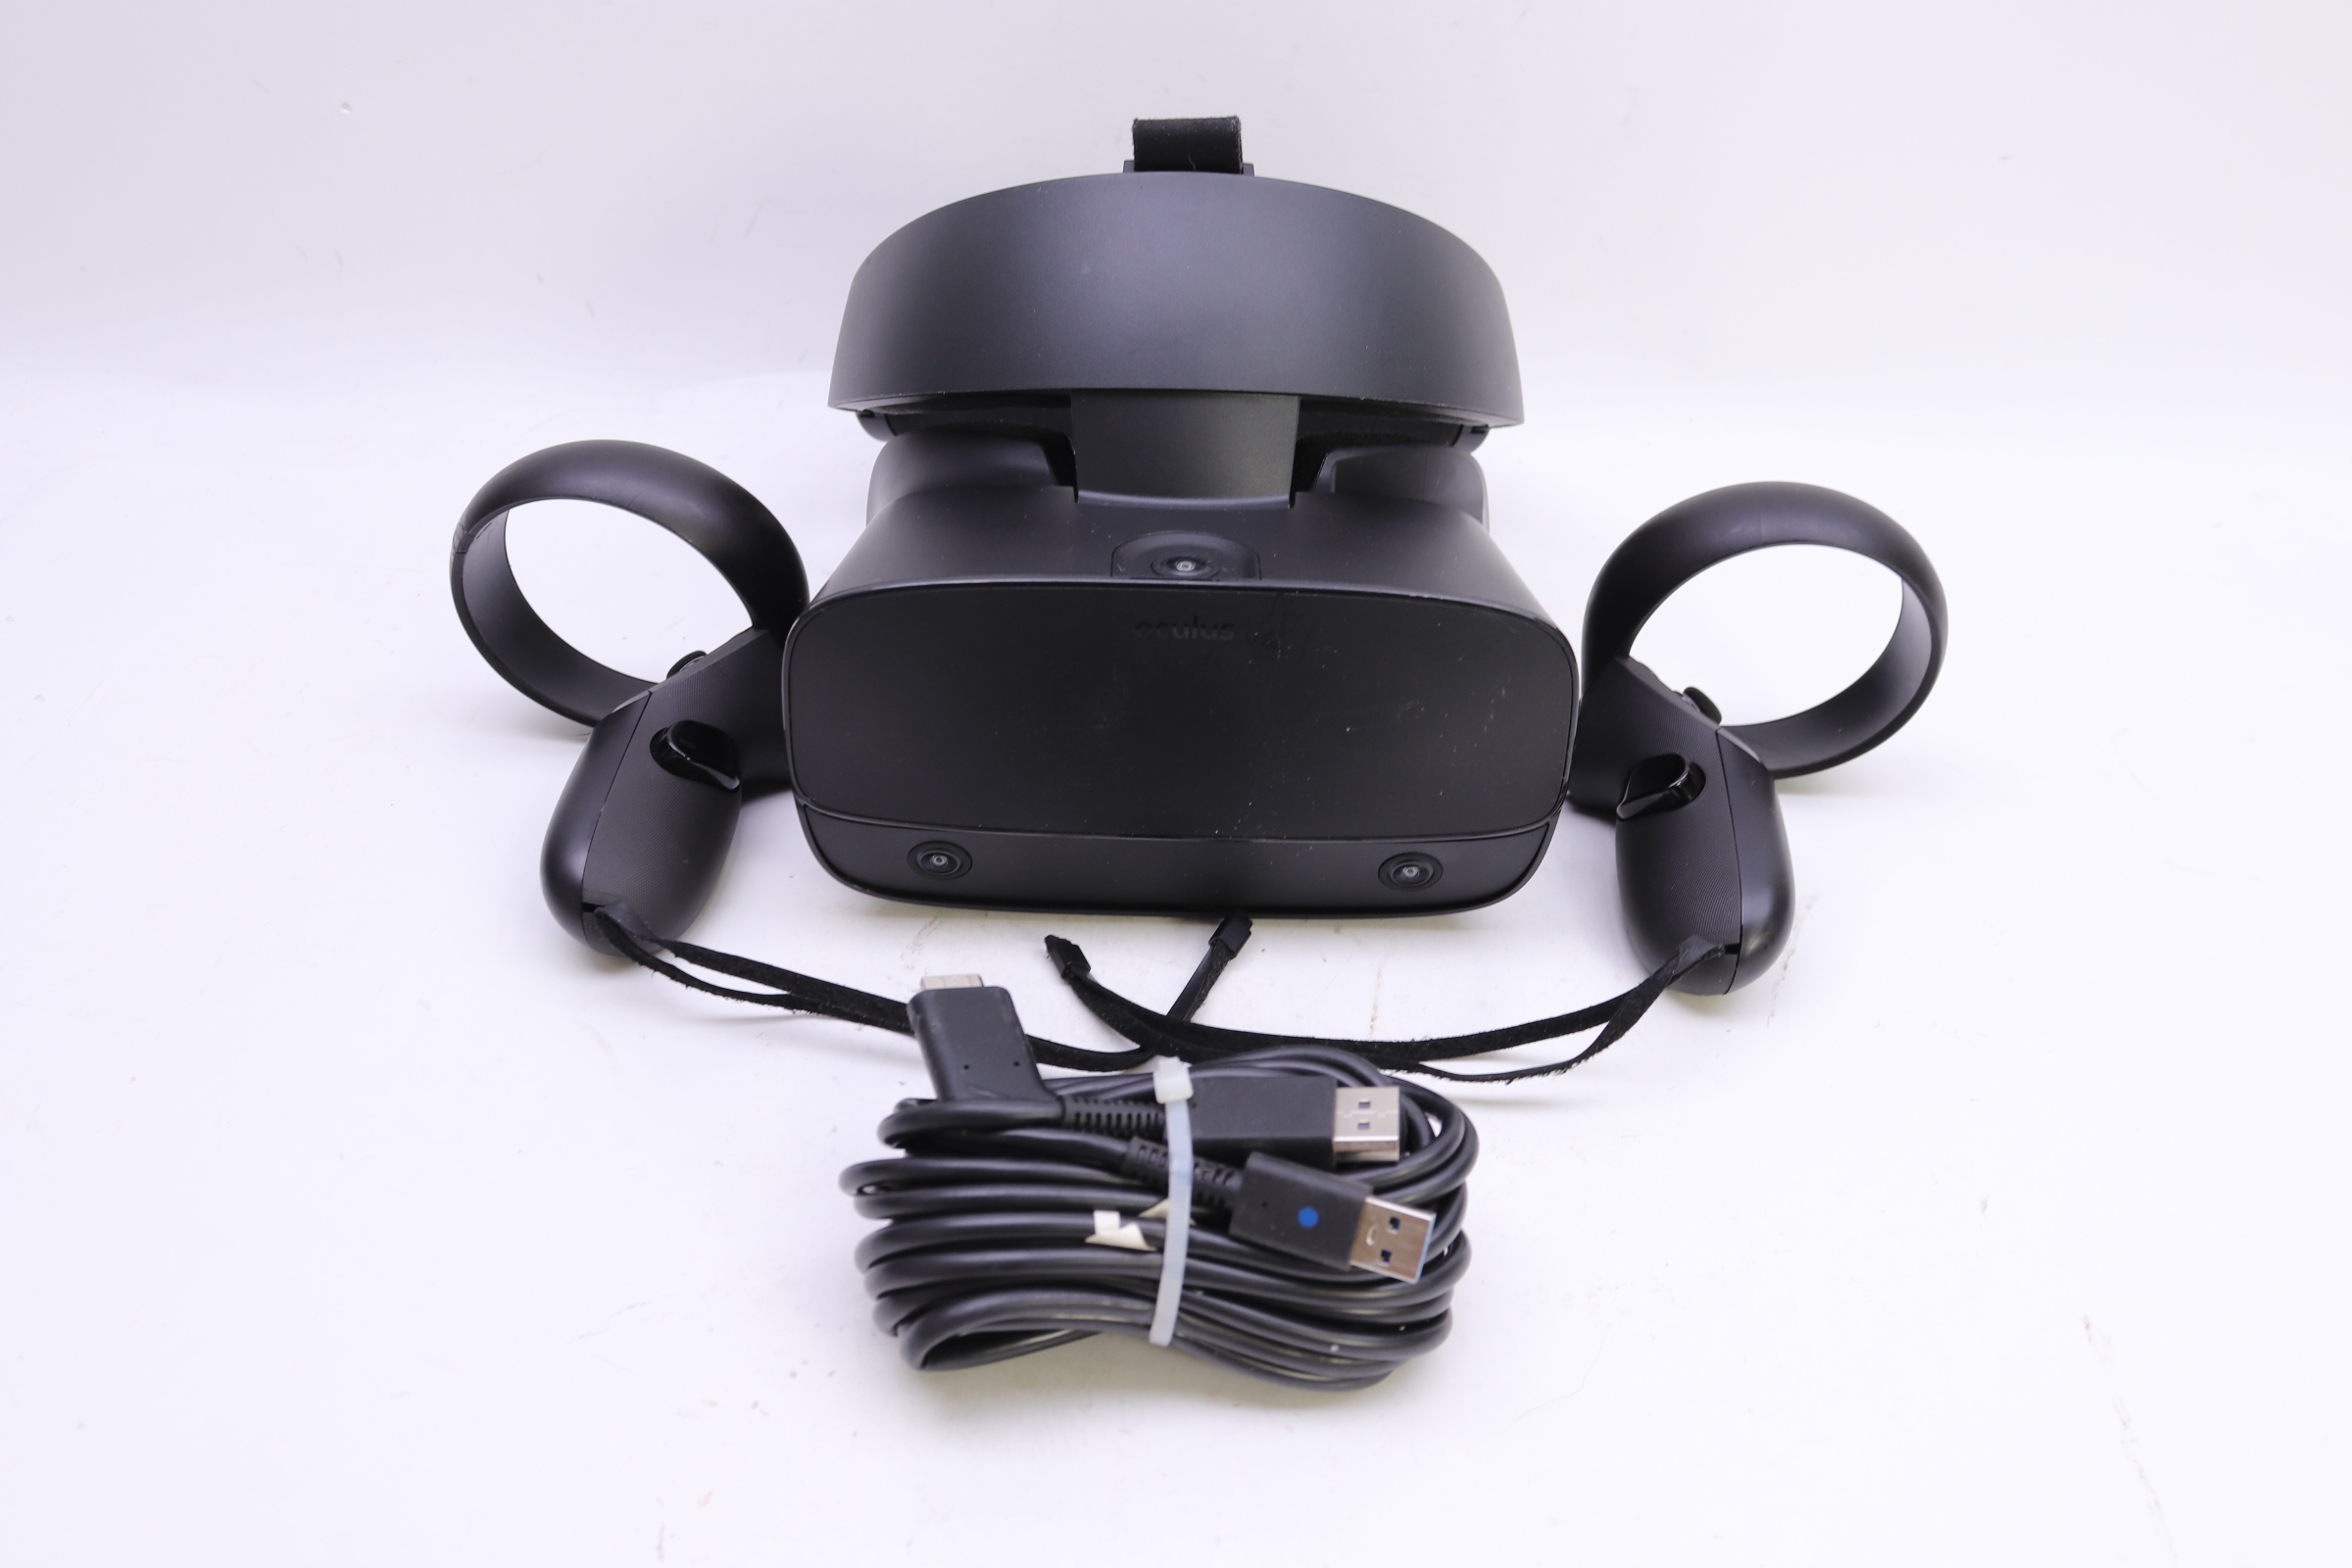 Oculus Rift S PC-Powered VR Gaming Headset In stock Ready to Ship